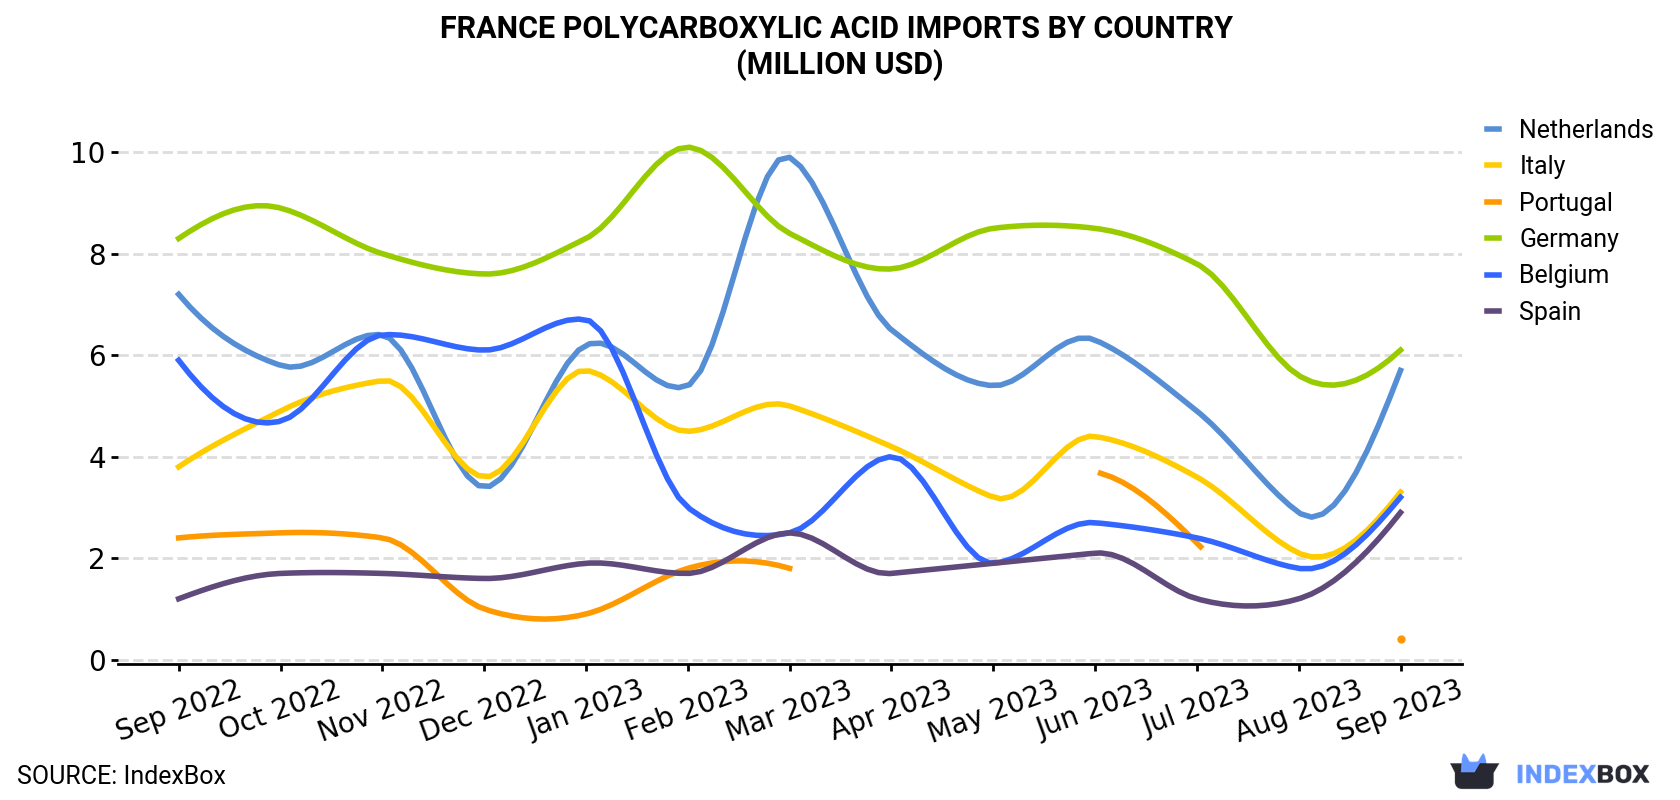 France Polycarboxylic Acid Imports By Country (Million USD)